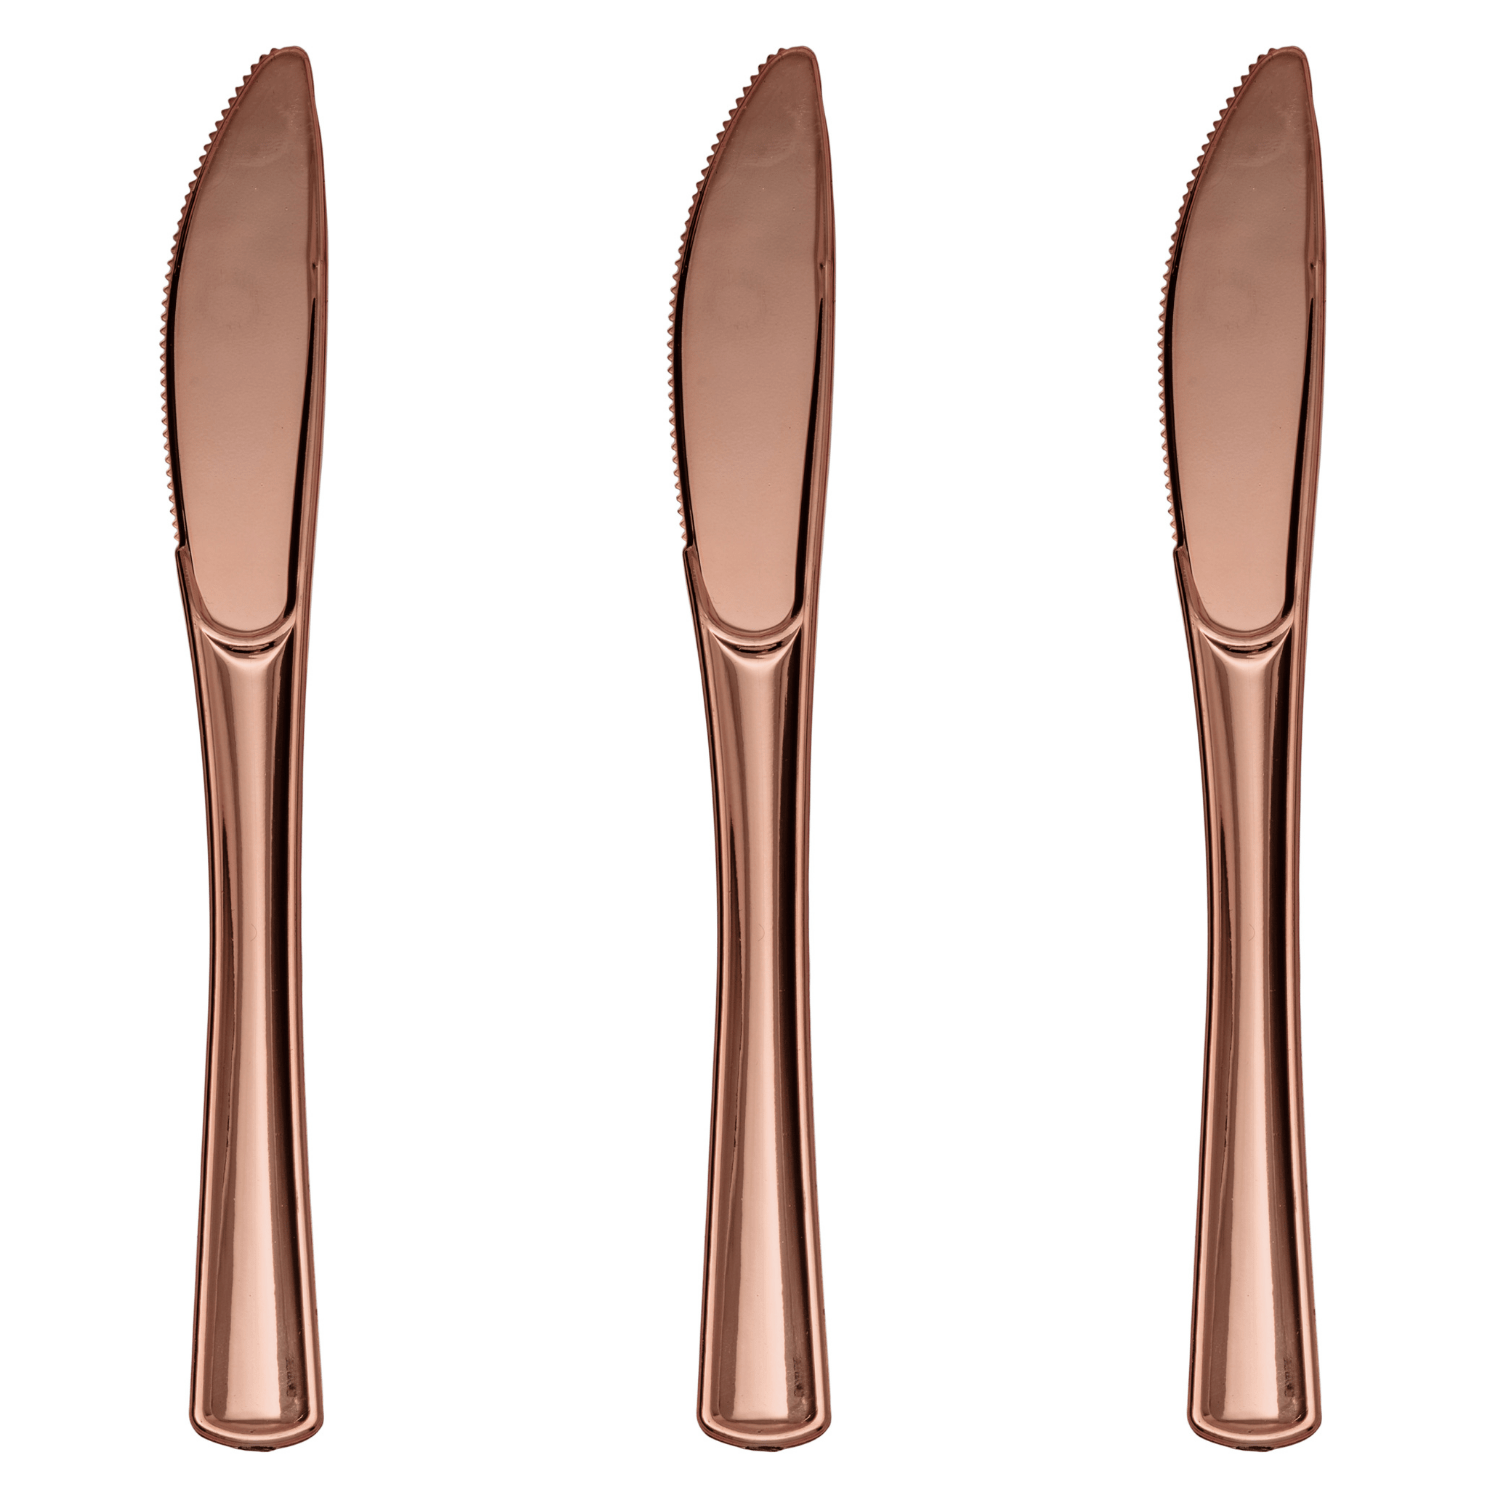 Exquisite Rose Gold Plastic Knives | 480 Count - Yom Tov Settings